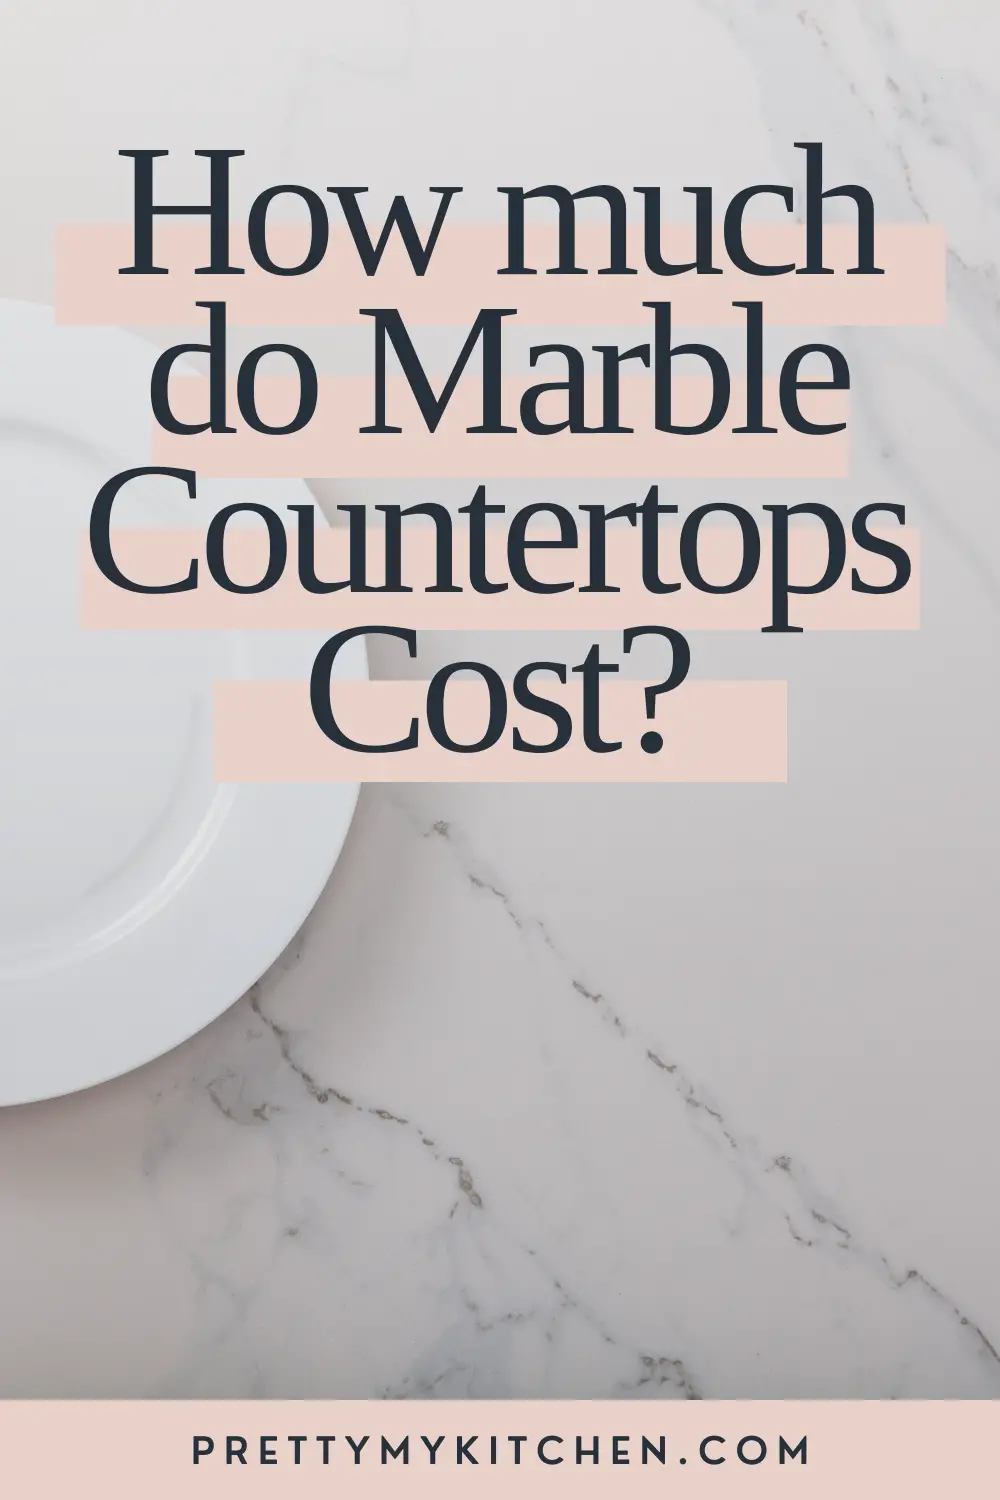 How much do marble countertops cost?